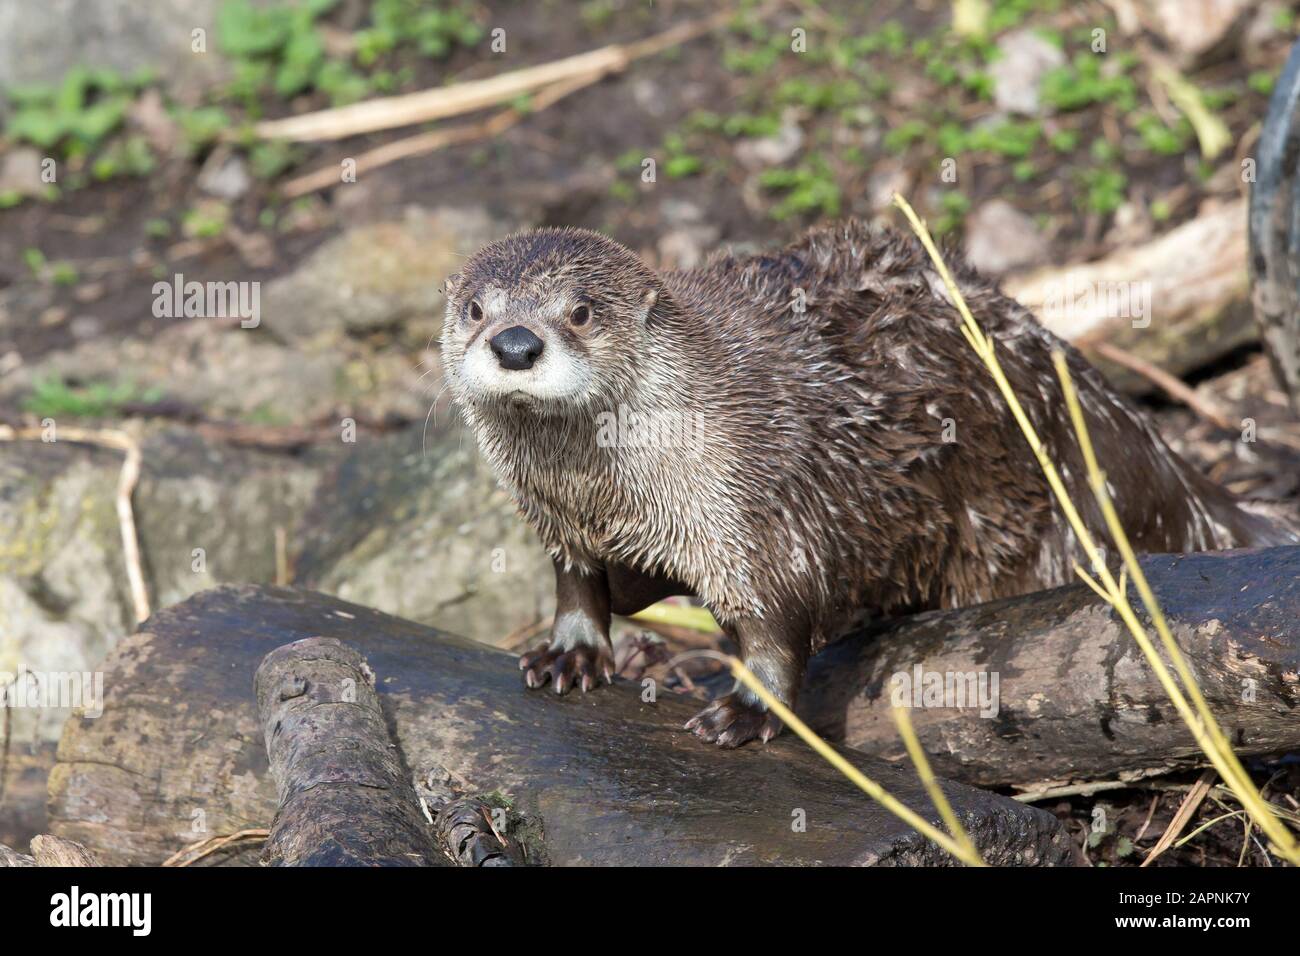 Front view close up of North American River otter (Lontra canadensis) isolated in captivity in outdoor enclosure at WWT Slimbridge, UK. Stock Photo